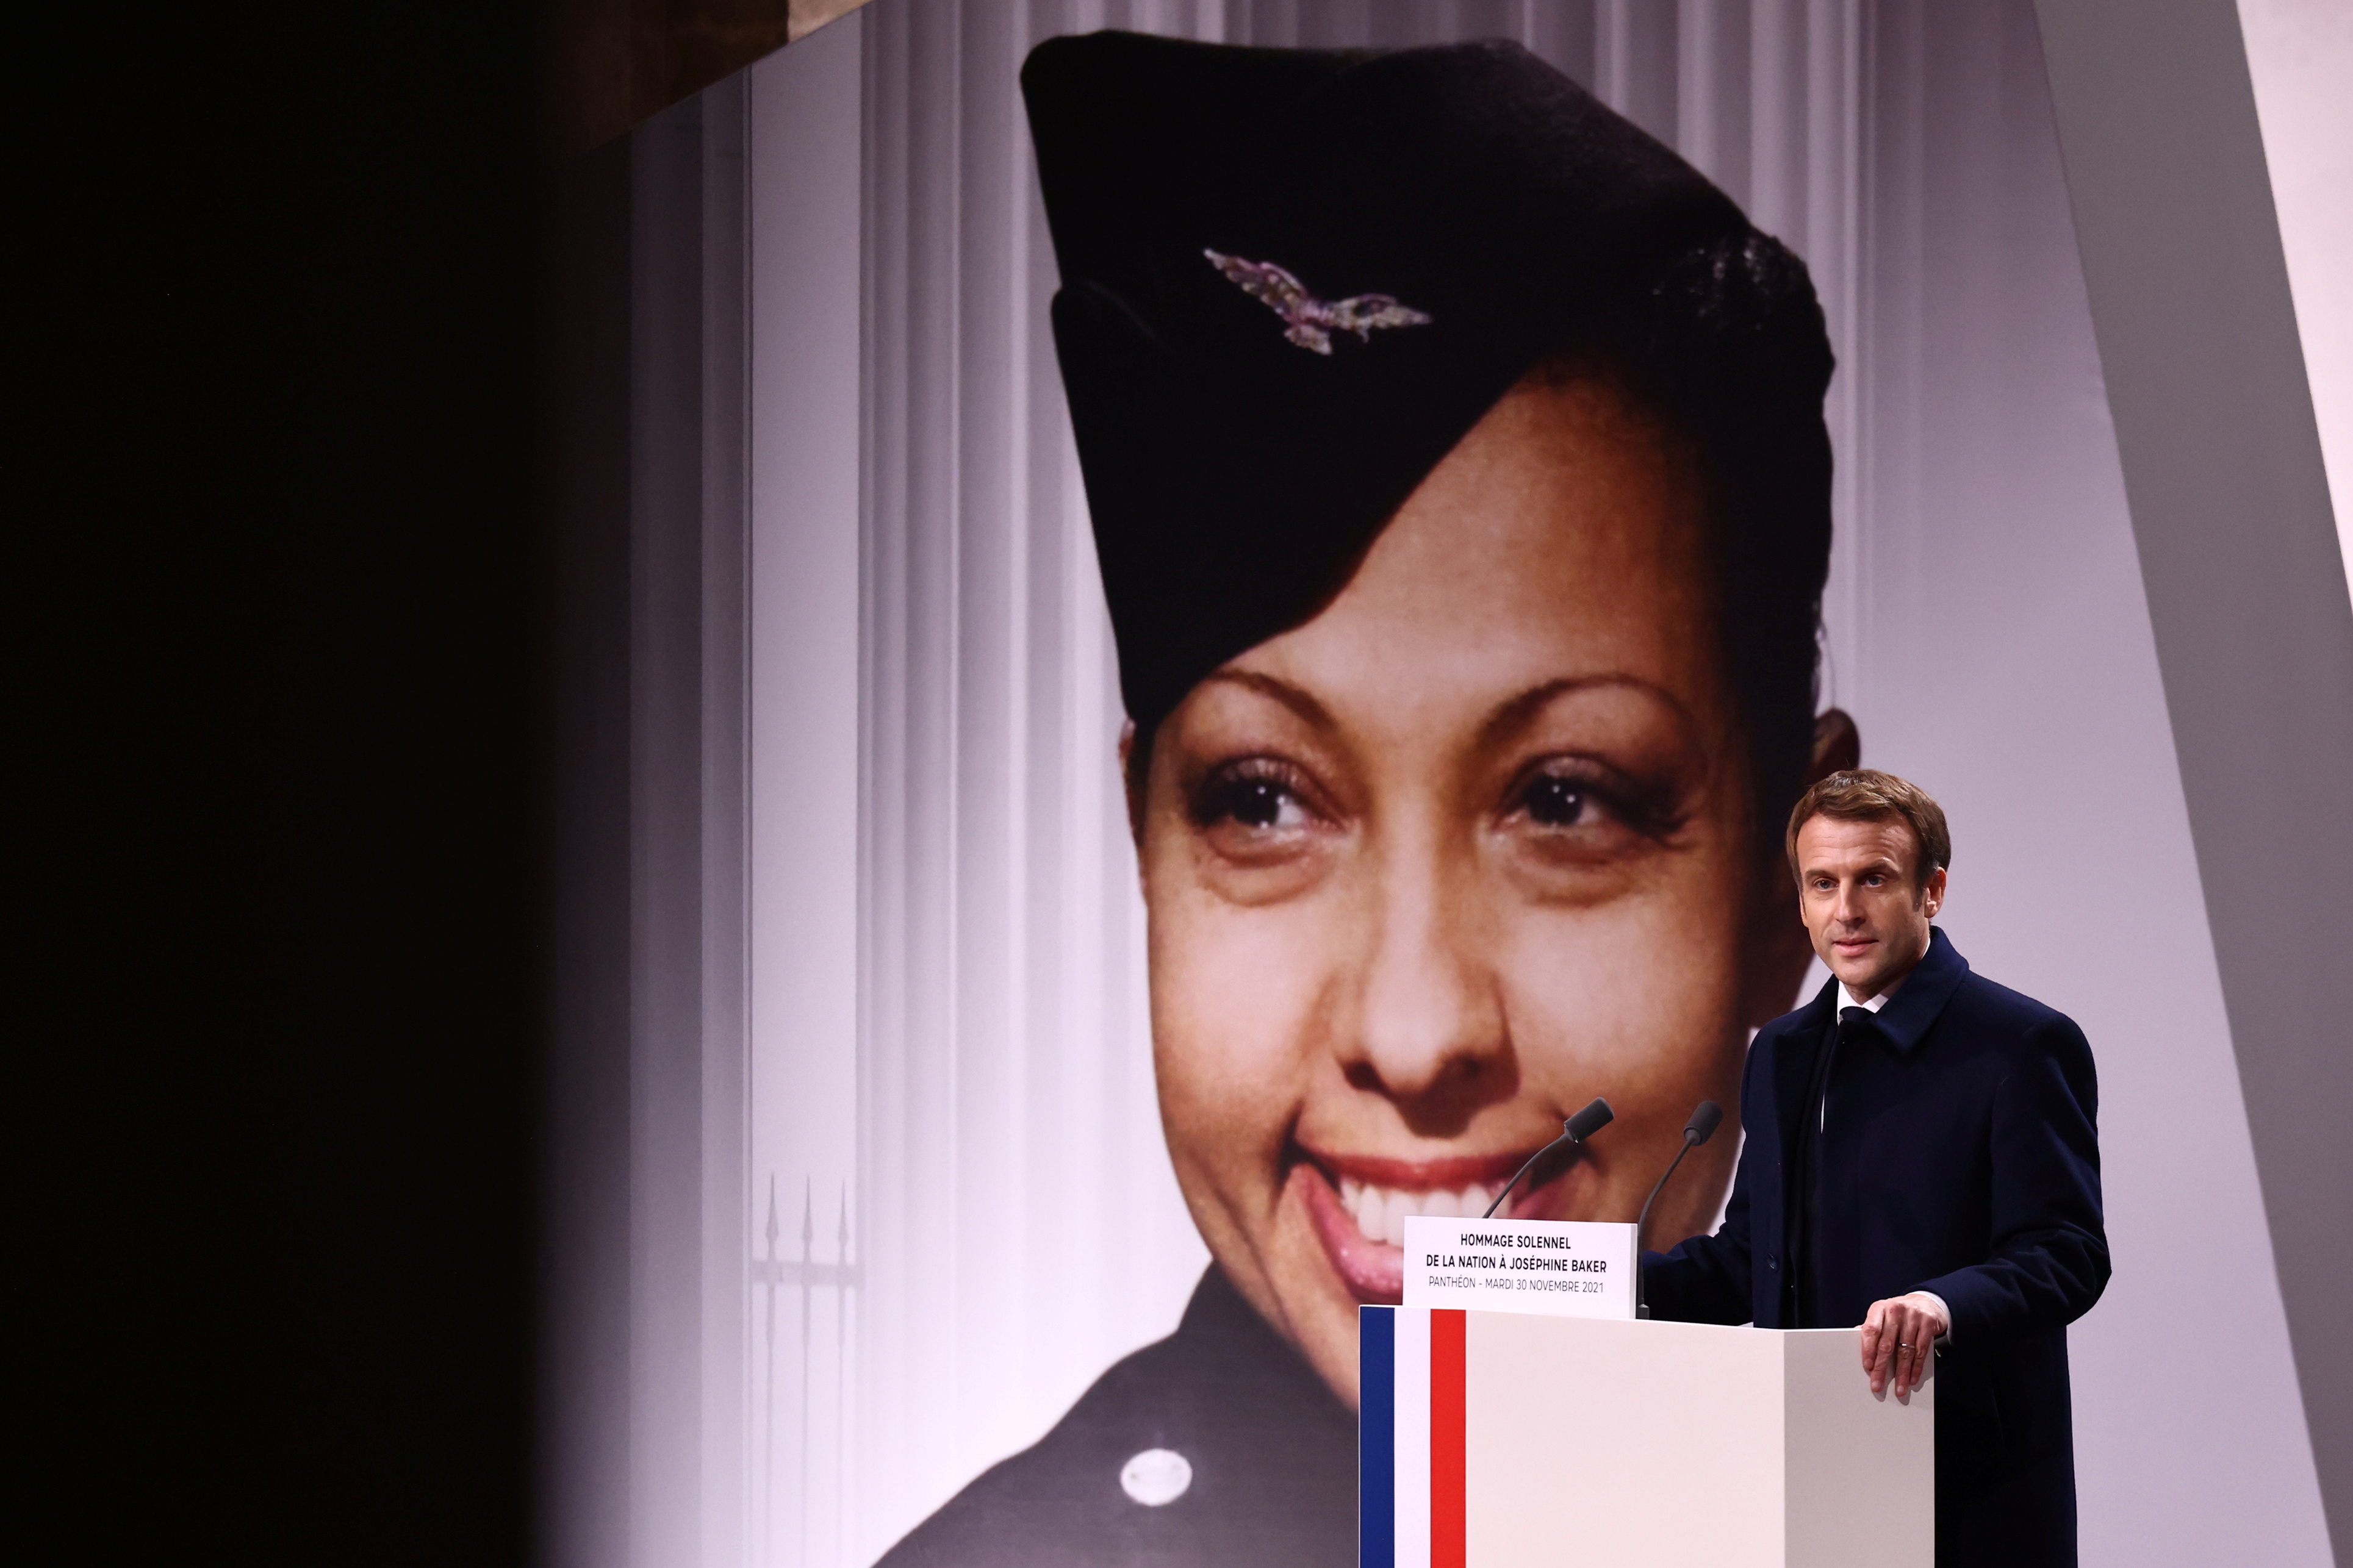 French President Emmanuel Macron delivers a speech during a ceremony honouring famed Black French-American singer and dancer Josephine Baker during her induction ceremony into the Pantheon where key figures from France's history are honoured, in Paris, France, November 30, 2021. REUTERS/Sarah Meyssonnier/Pool